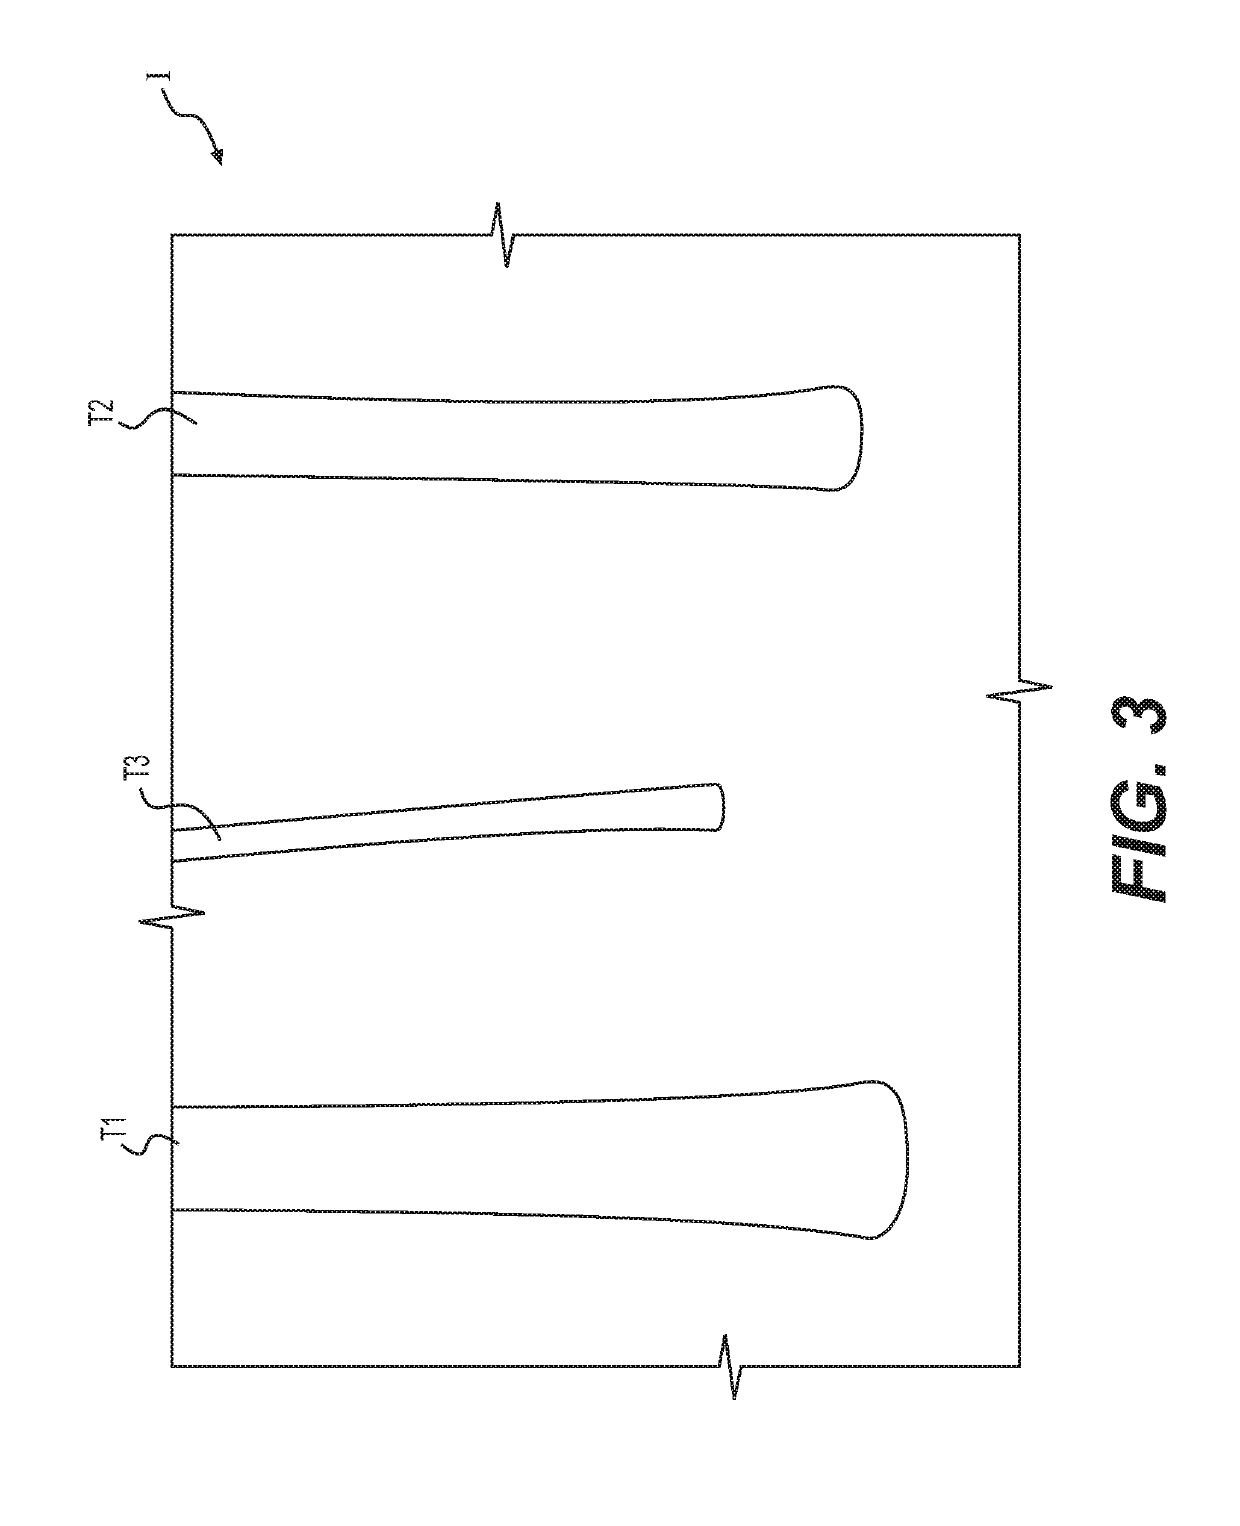 Method of performing dendrometry and forest mapping